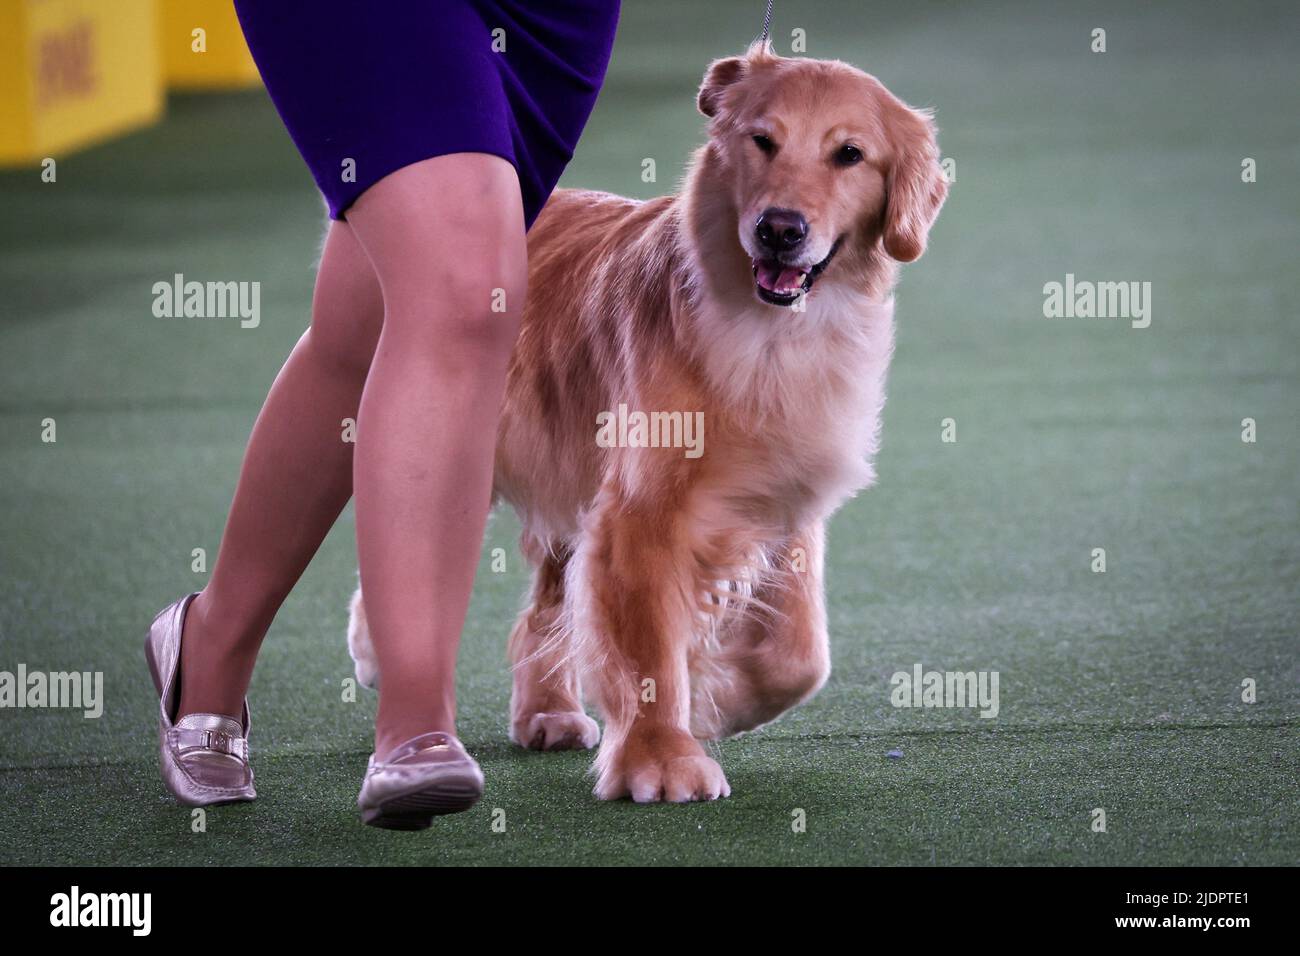 A handler runs a Golden Retriever dog during a competition in the Sporting Group at the 146th Westminster Kennel Club Dog Show at the Lyndhurst Estate in Tarrytown, New York, U.S., June 22, 2022. REUTERS/Mike Segar Stock Photo